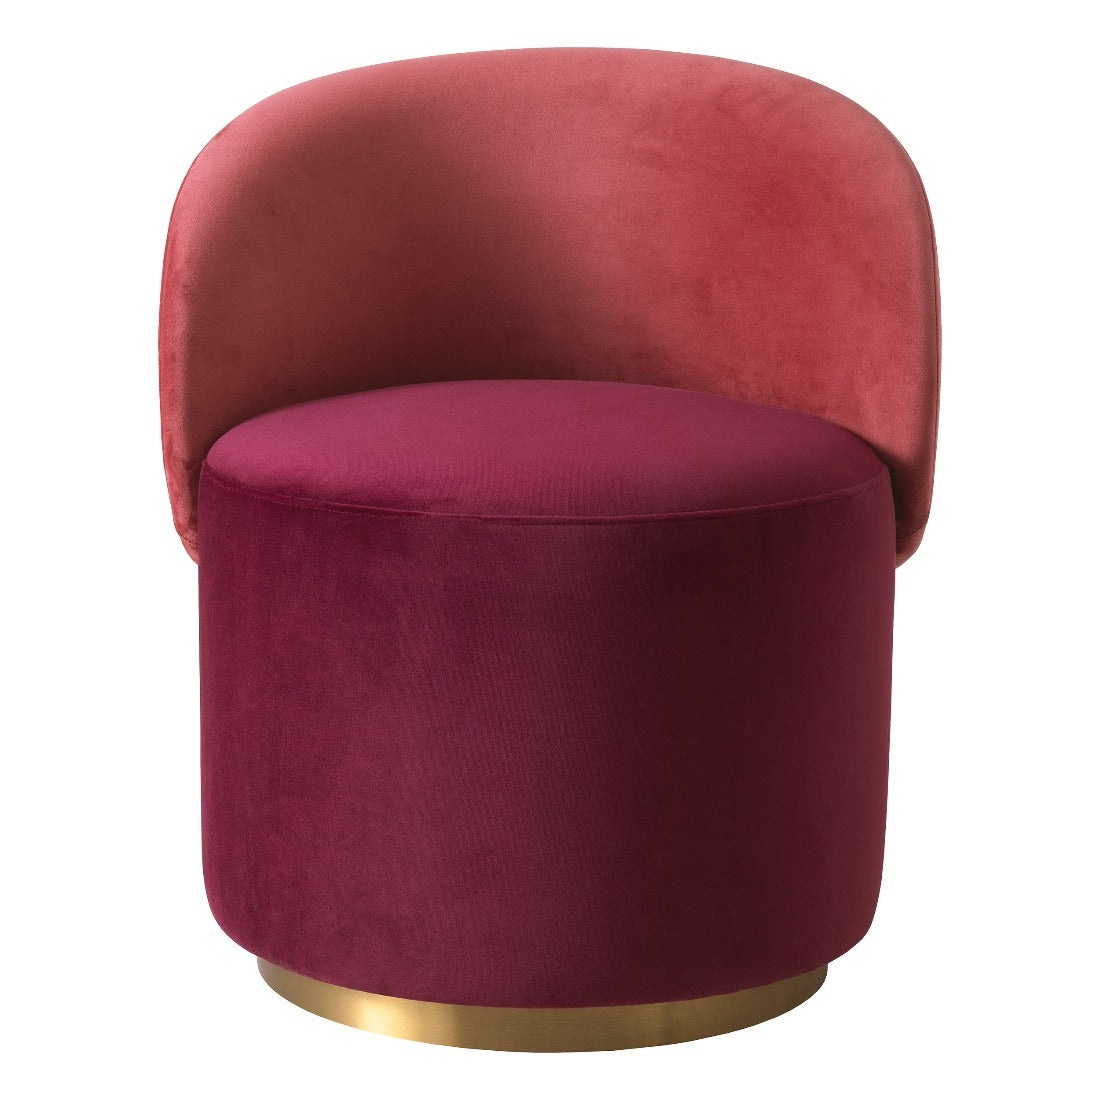 Low swivel dining chair Eichholtz Greer bordeaux red